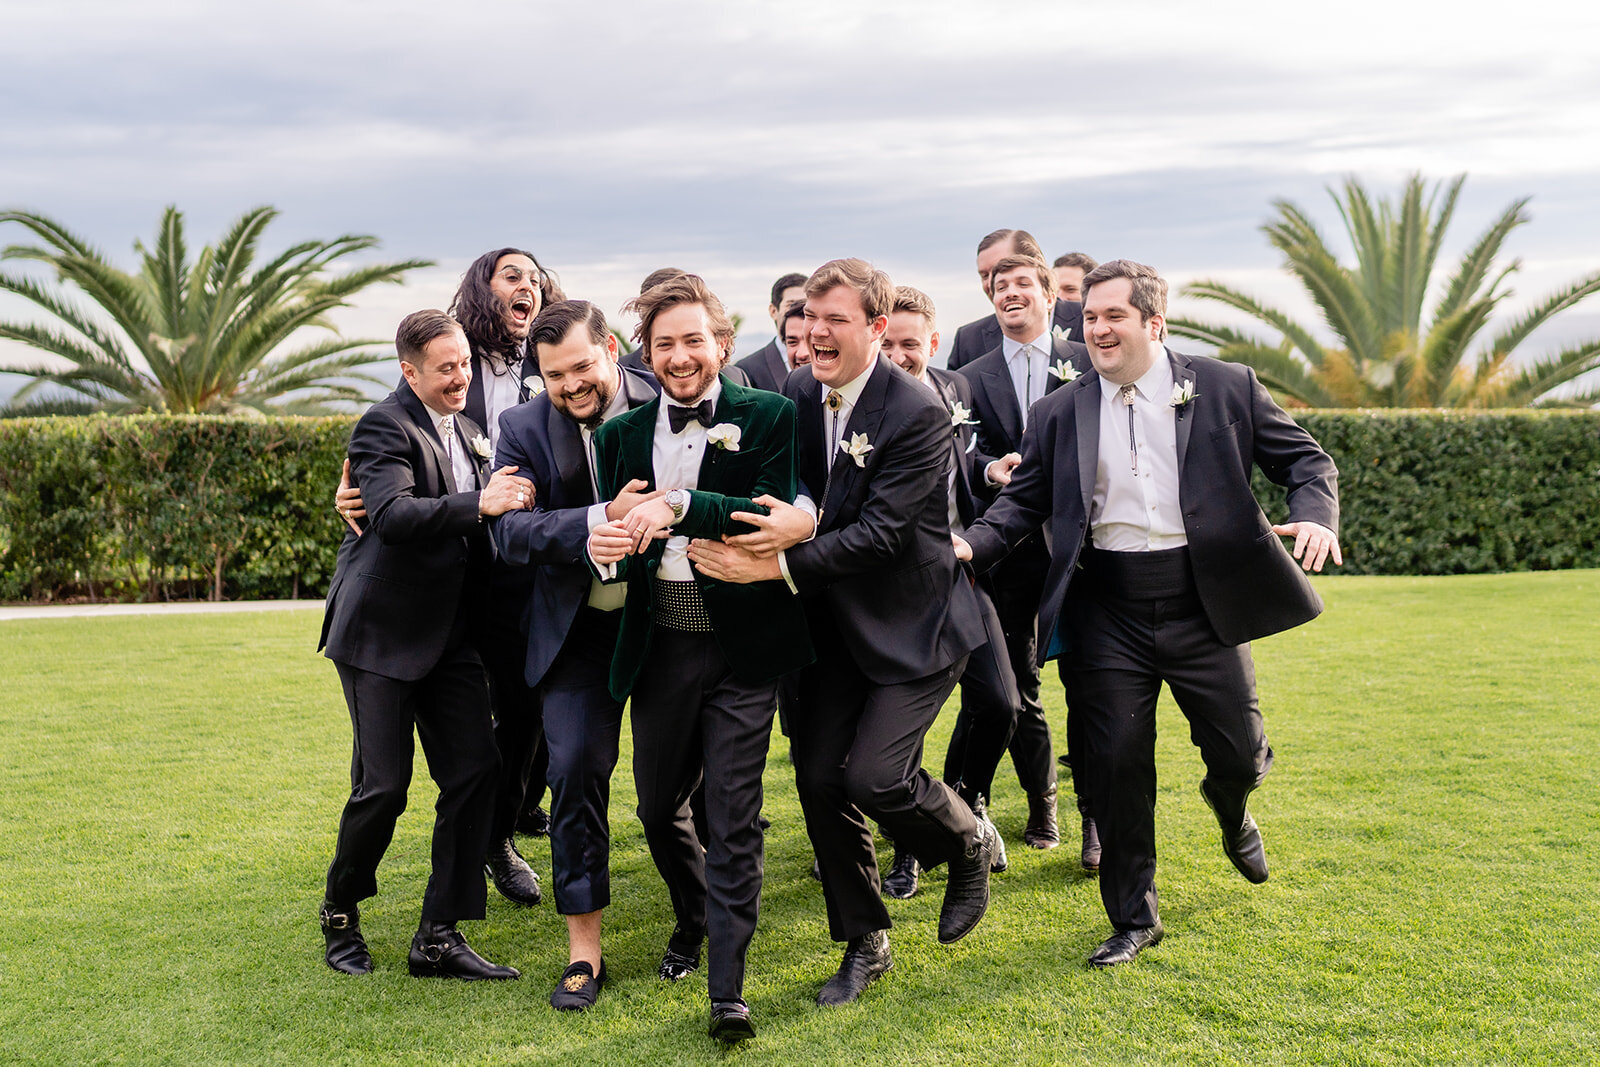 Groomsmen huddled and embracing groom as they are walking on a green lawn with palm trees in the background